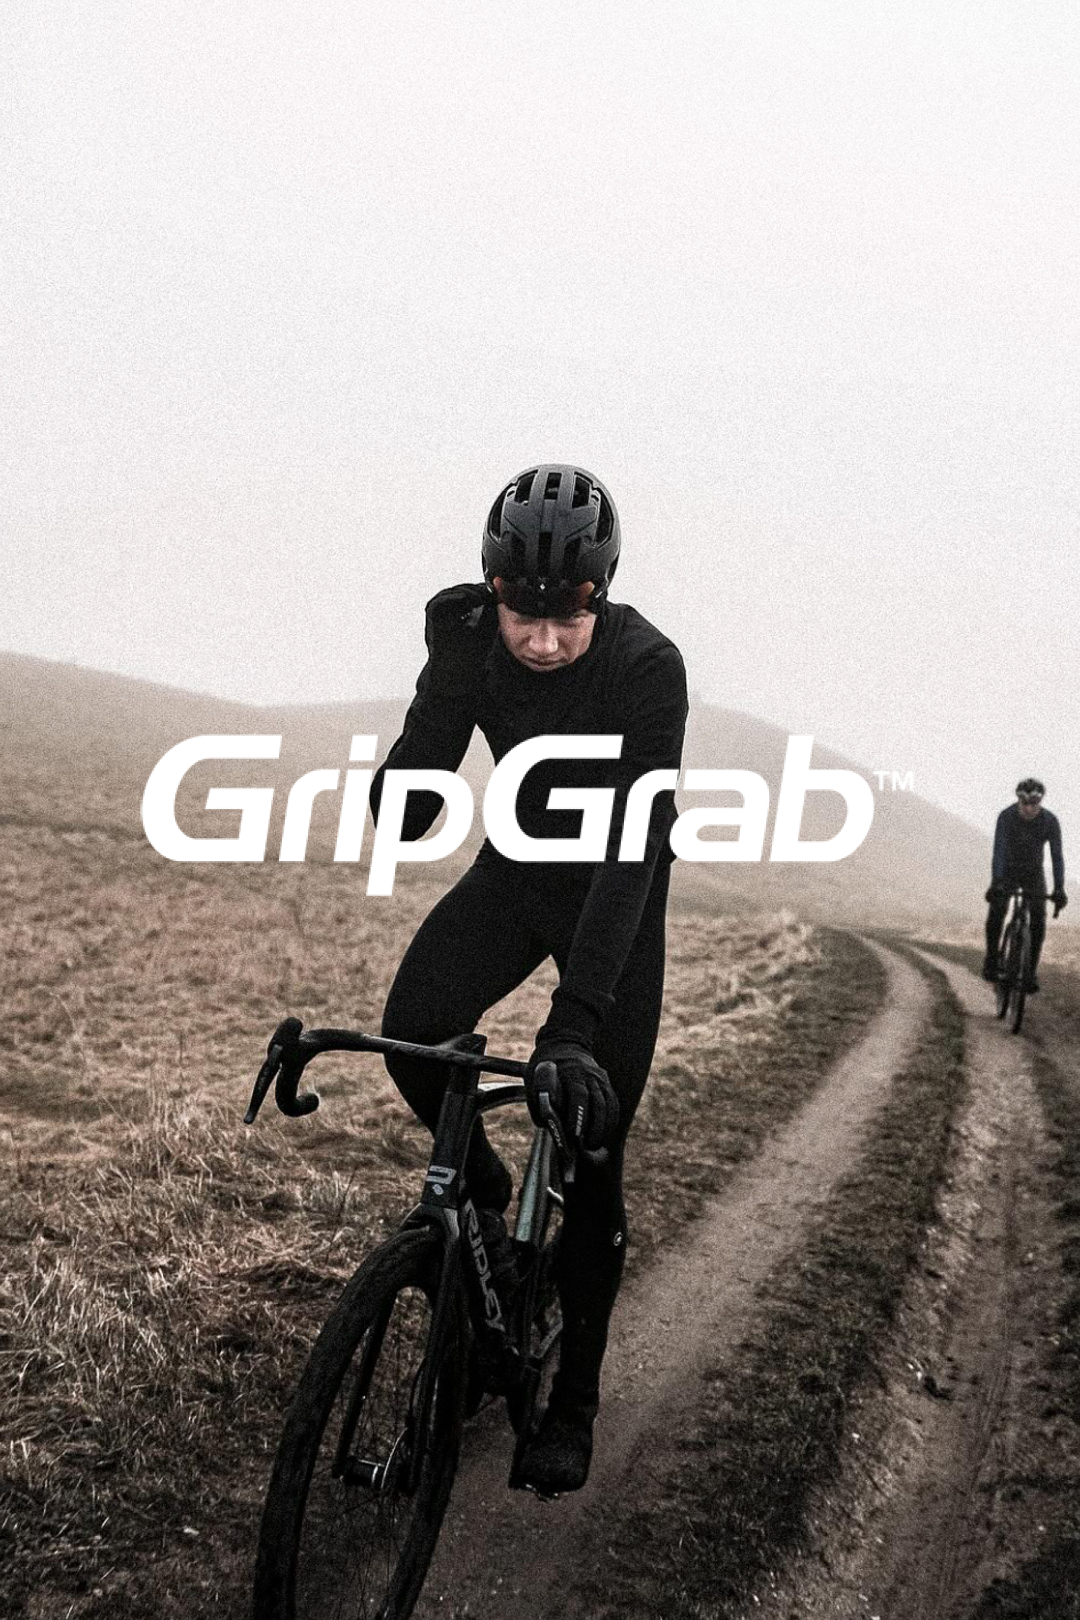 Cyclist wearing GripGrab apparel riding solo on a misty countryside road @ Bici.